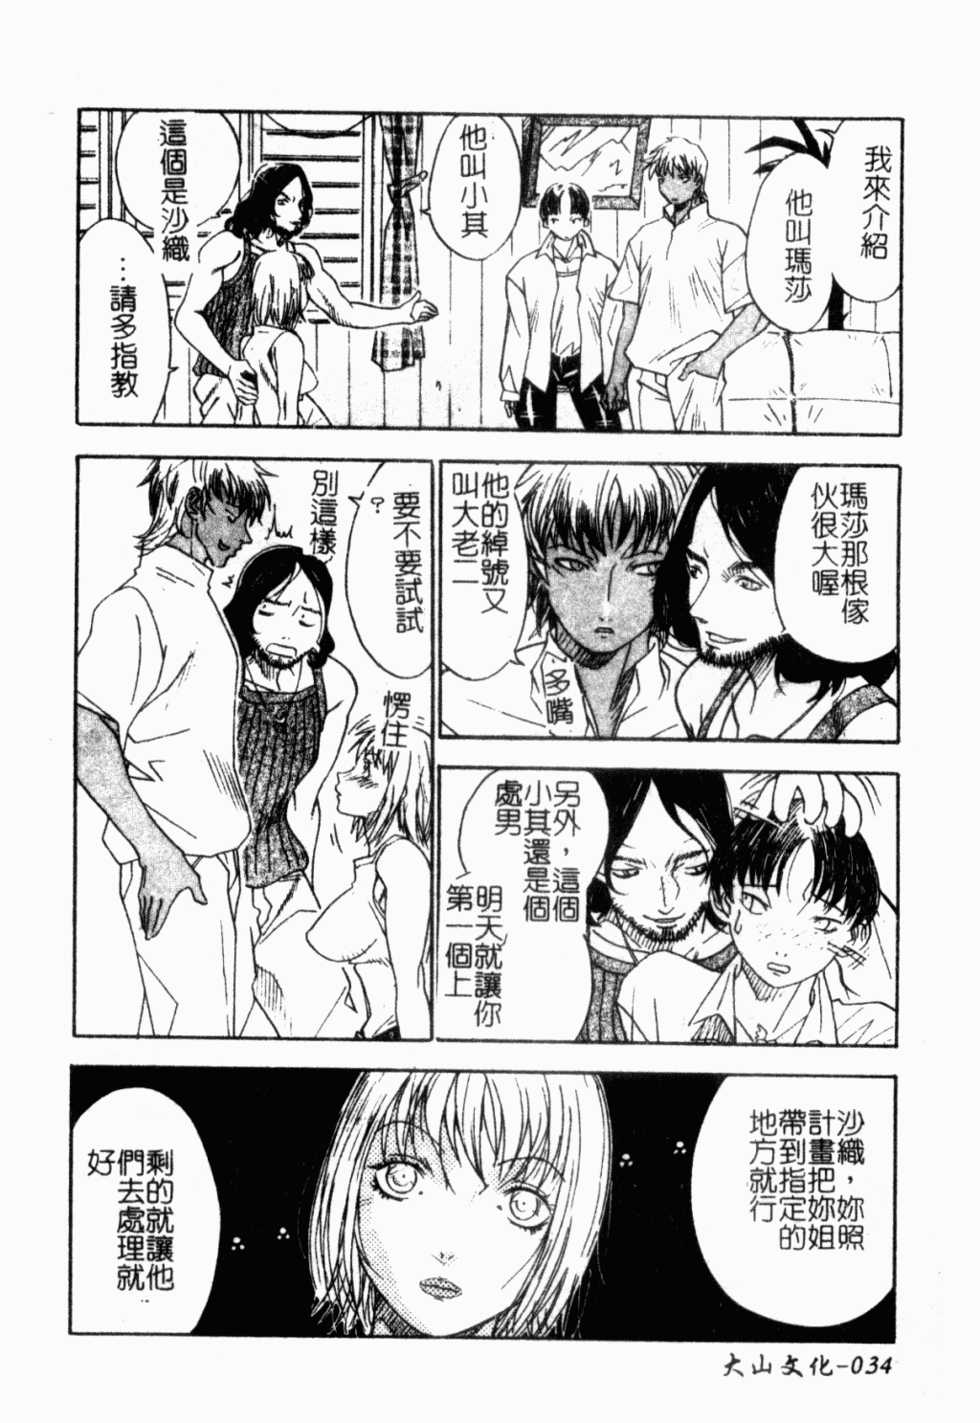 [Anthology] Rinkan & Rankou Excellent | 輪姦&乱交 精選集 [Chinese] - Page 33